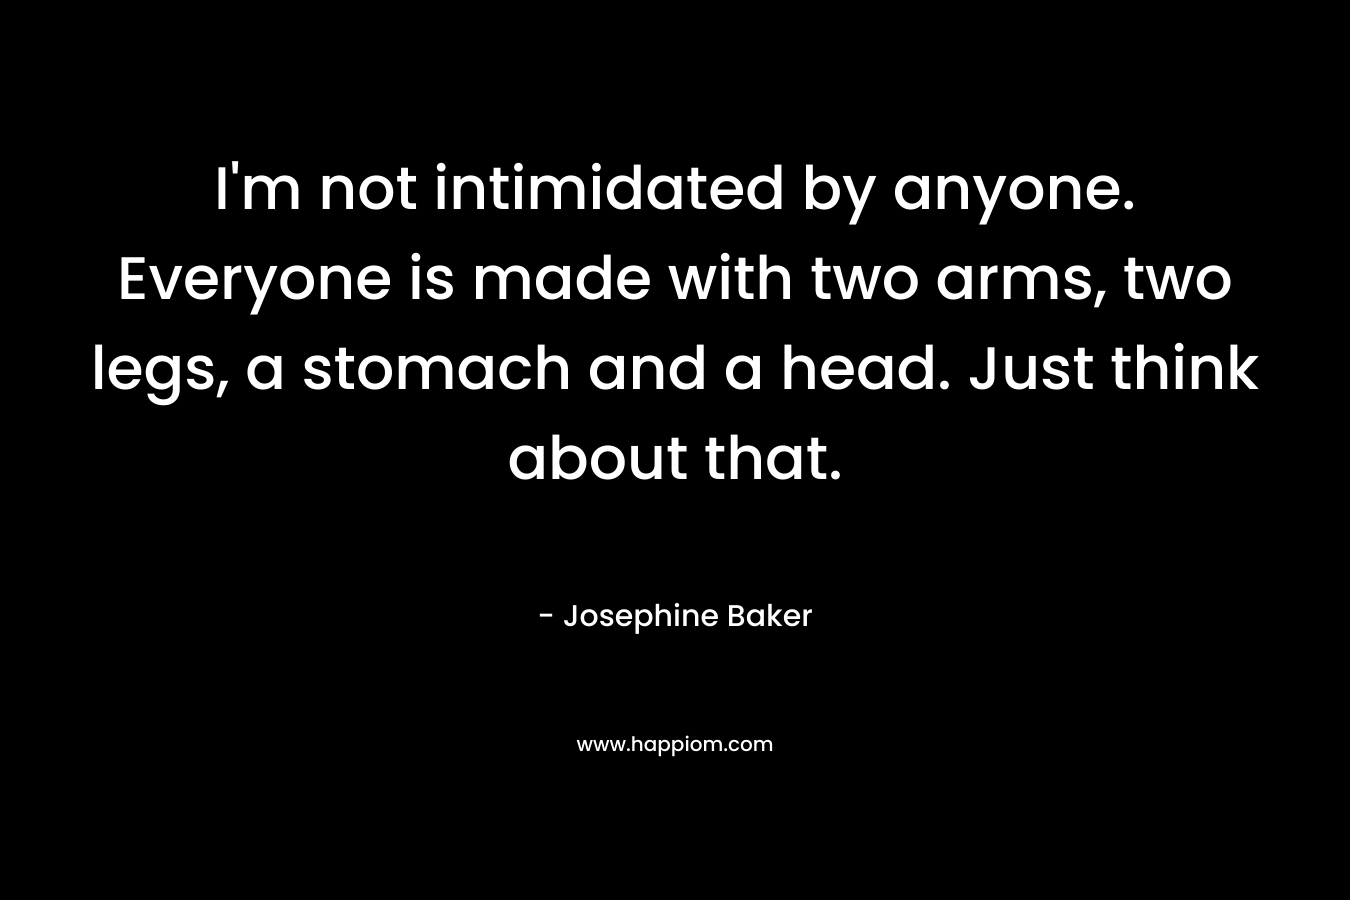 I’m not intimidated by anyone. Everyone is made with two arms, two legs, a stomach and a head. Just think about that. – Josephine Baker